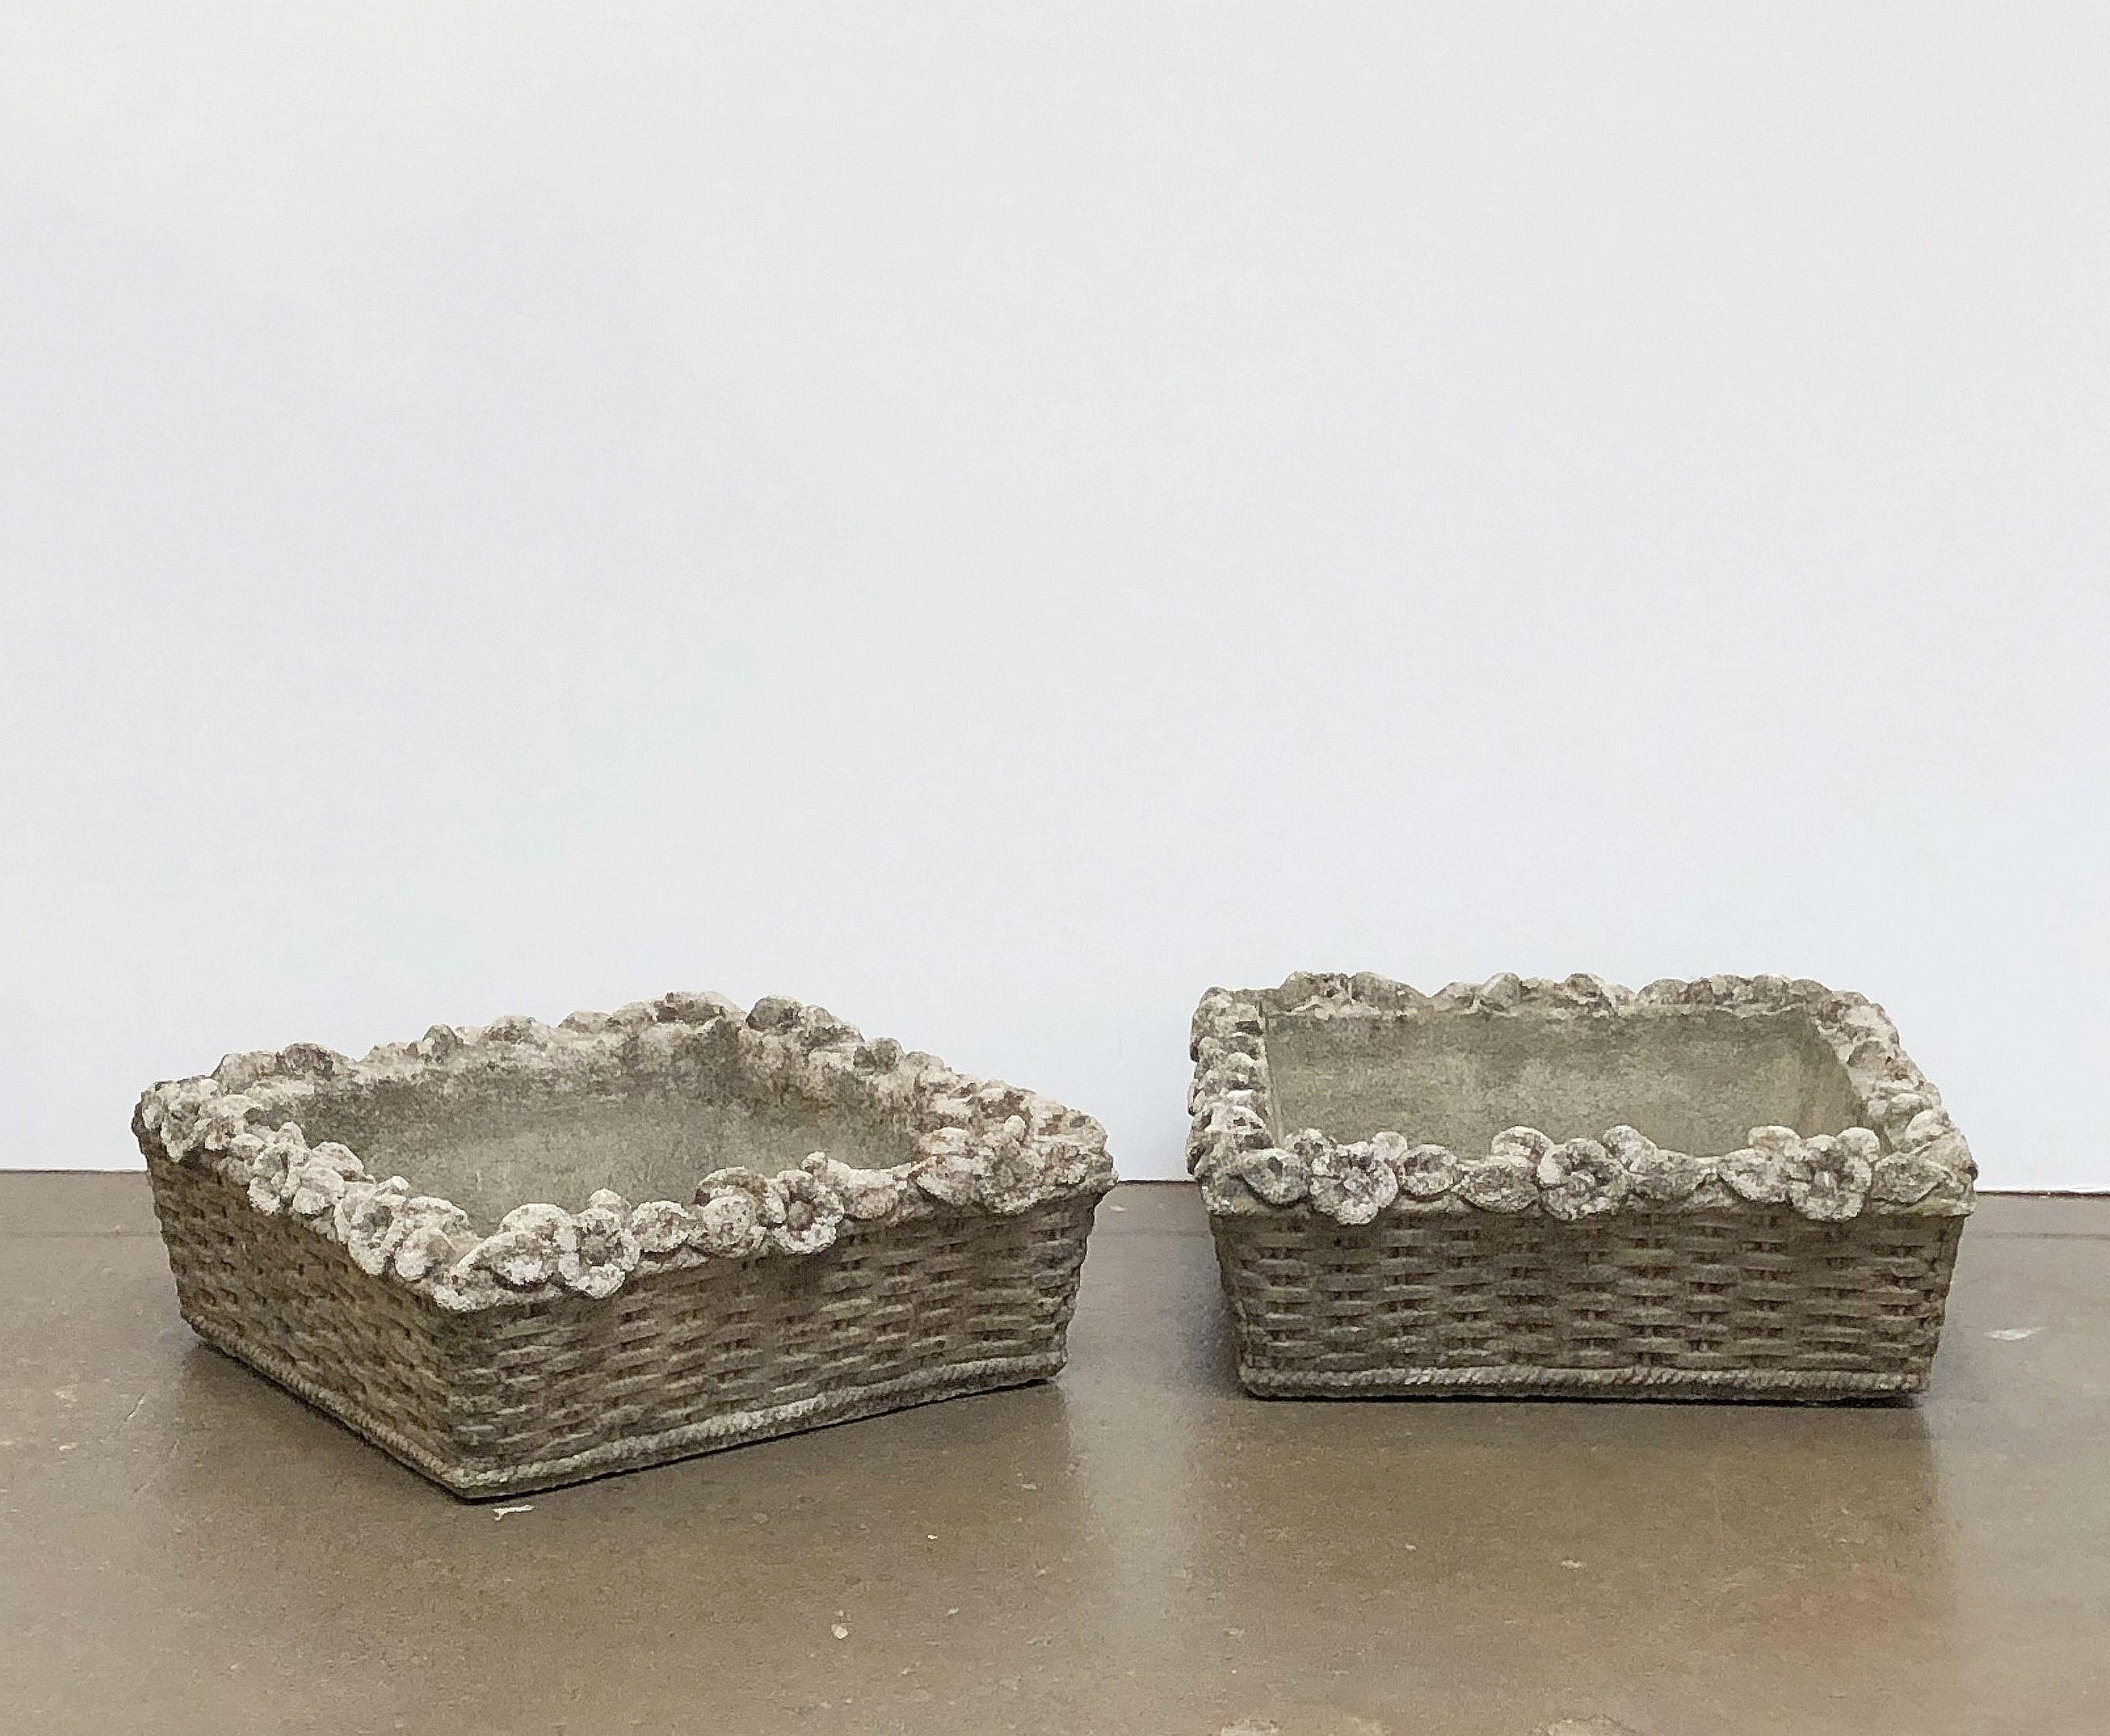 A pair of fine square English garden low planter pots or troughs of composition stone, each planter featuring a foliate relief over a basket weave design around the outside circumference and three drainage holes in the base.

An excellent addition